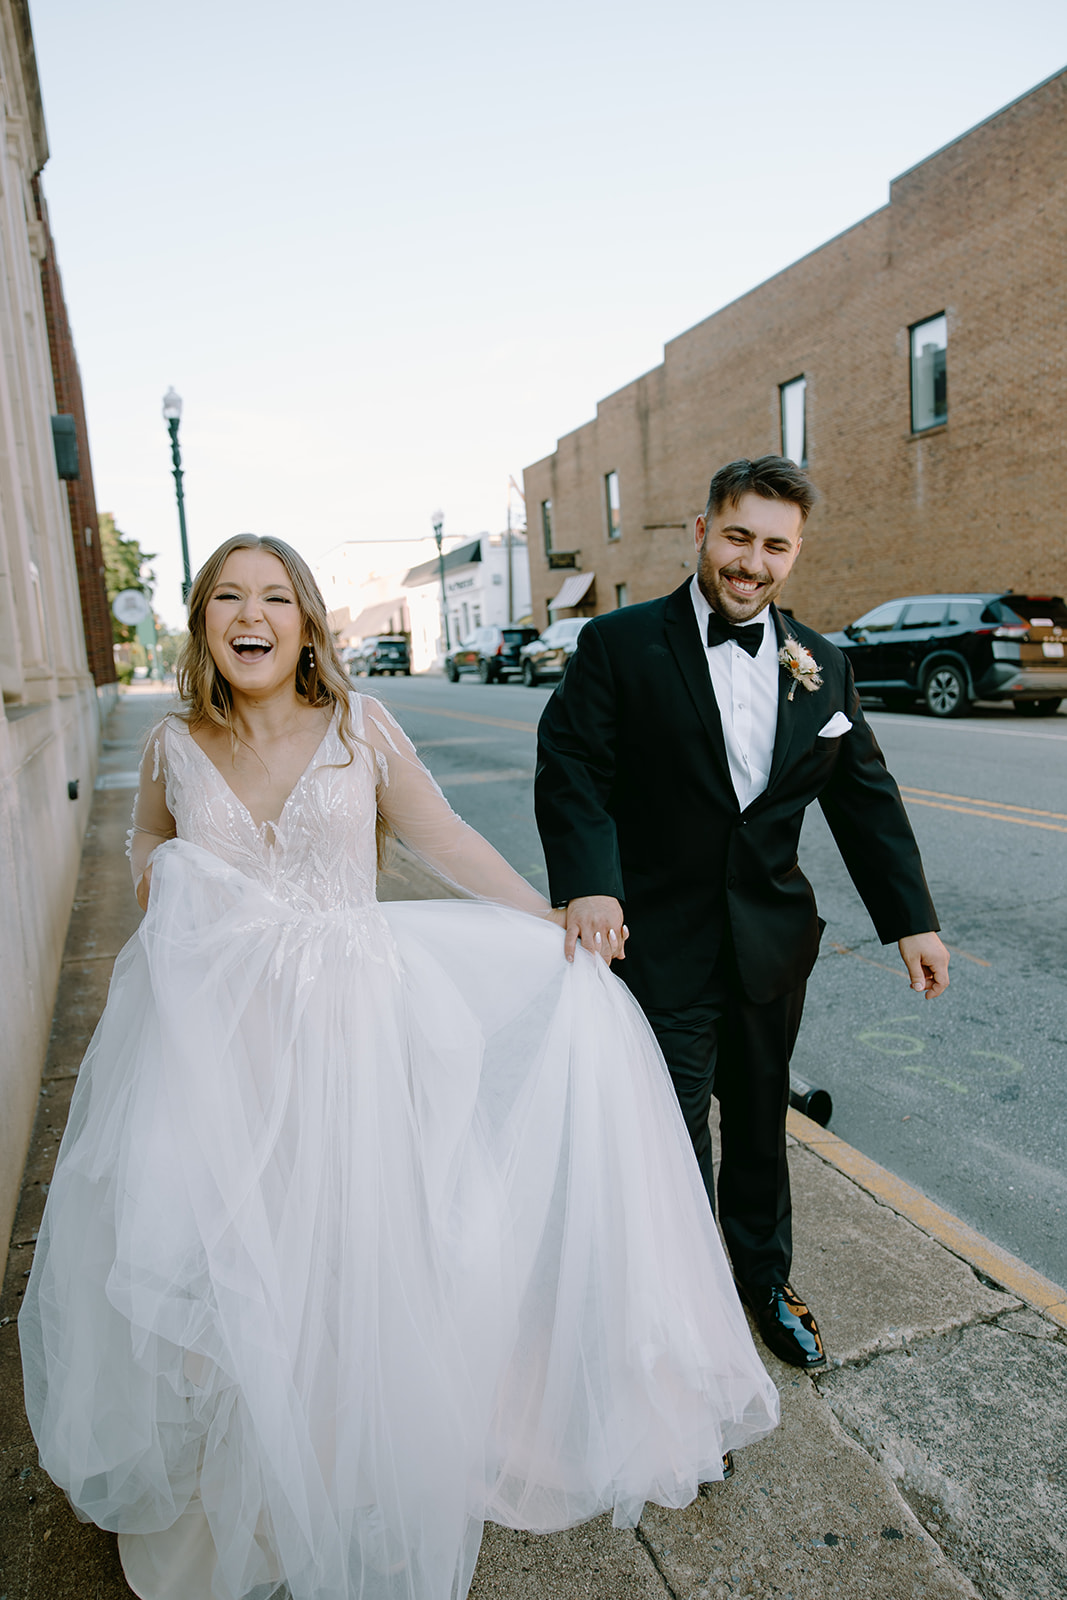 Downtown wedding photos captured by Charlotte Wedding Photographers and Videographers in North Carolina